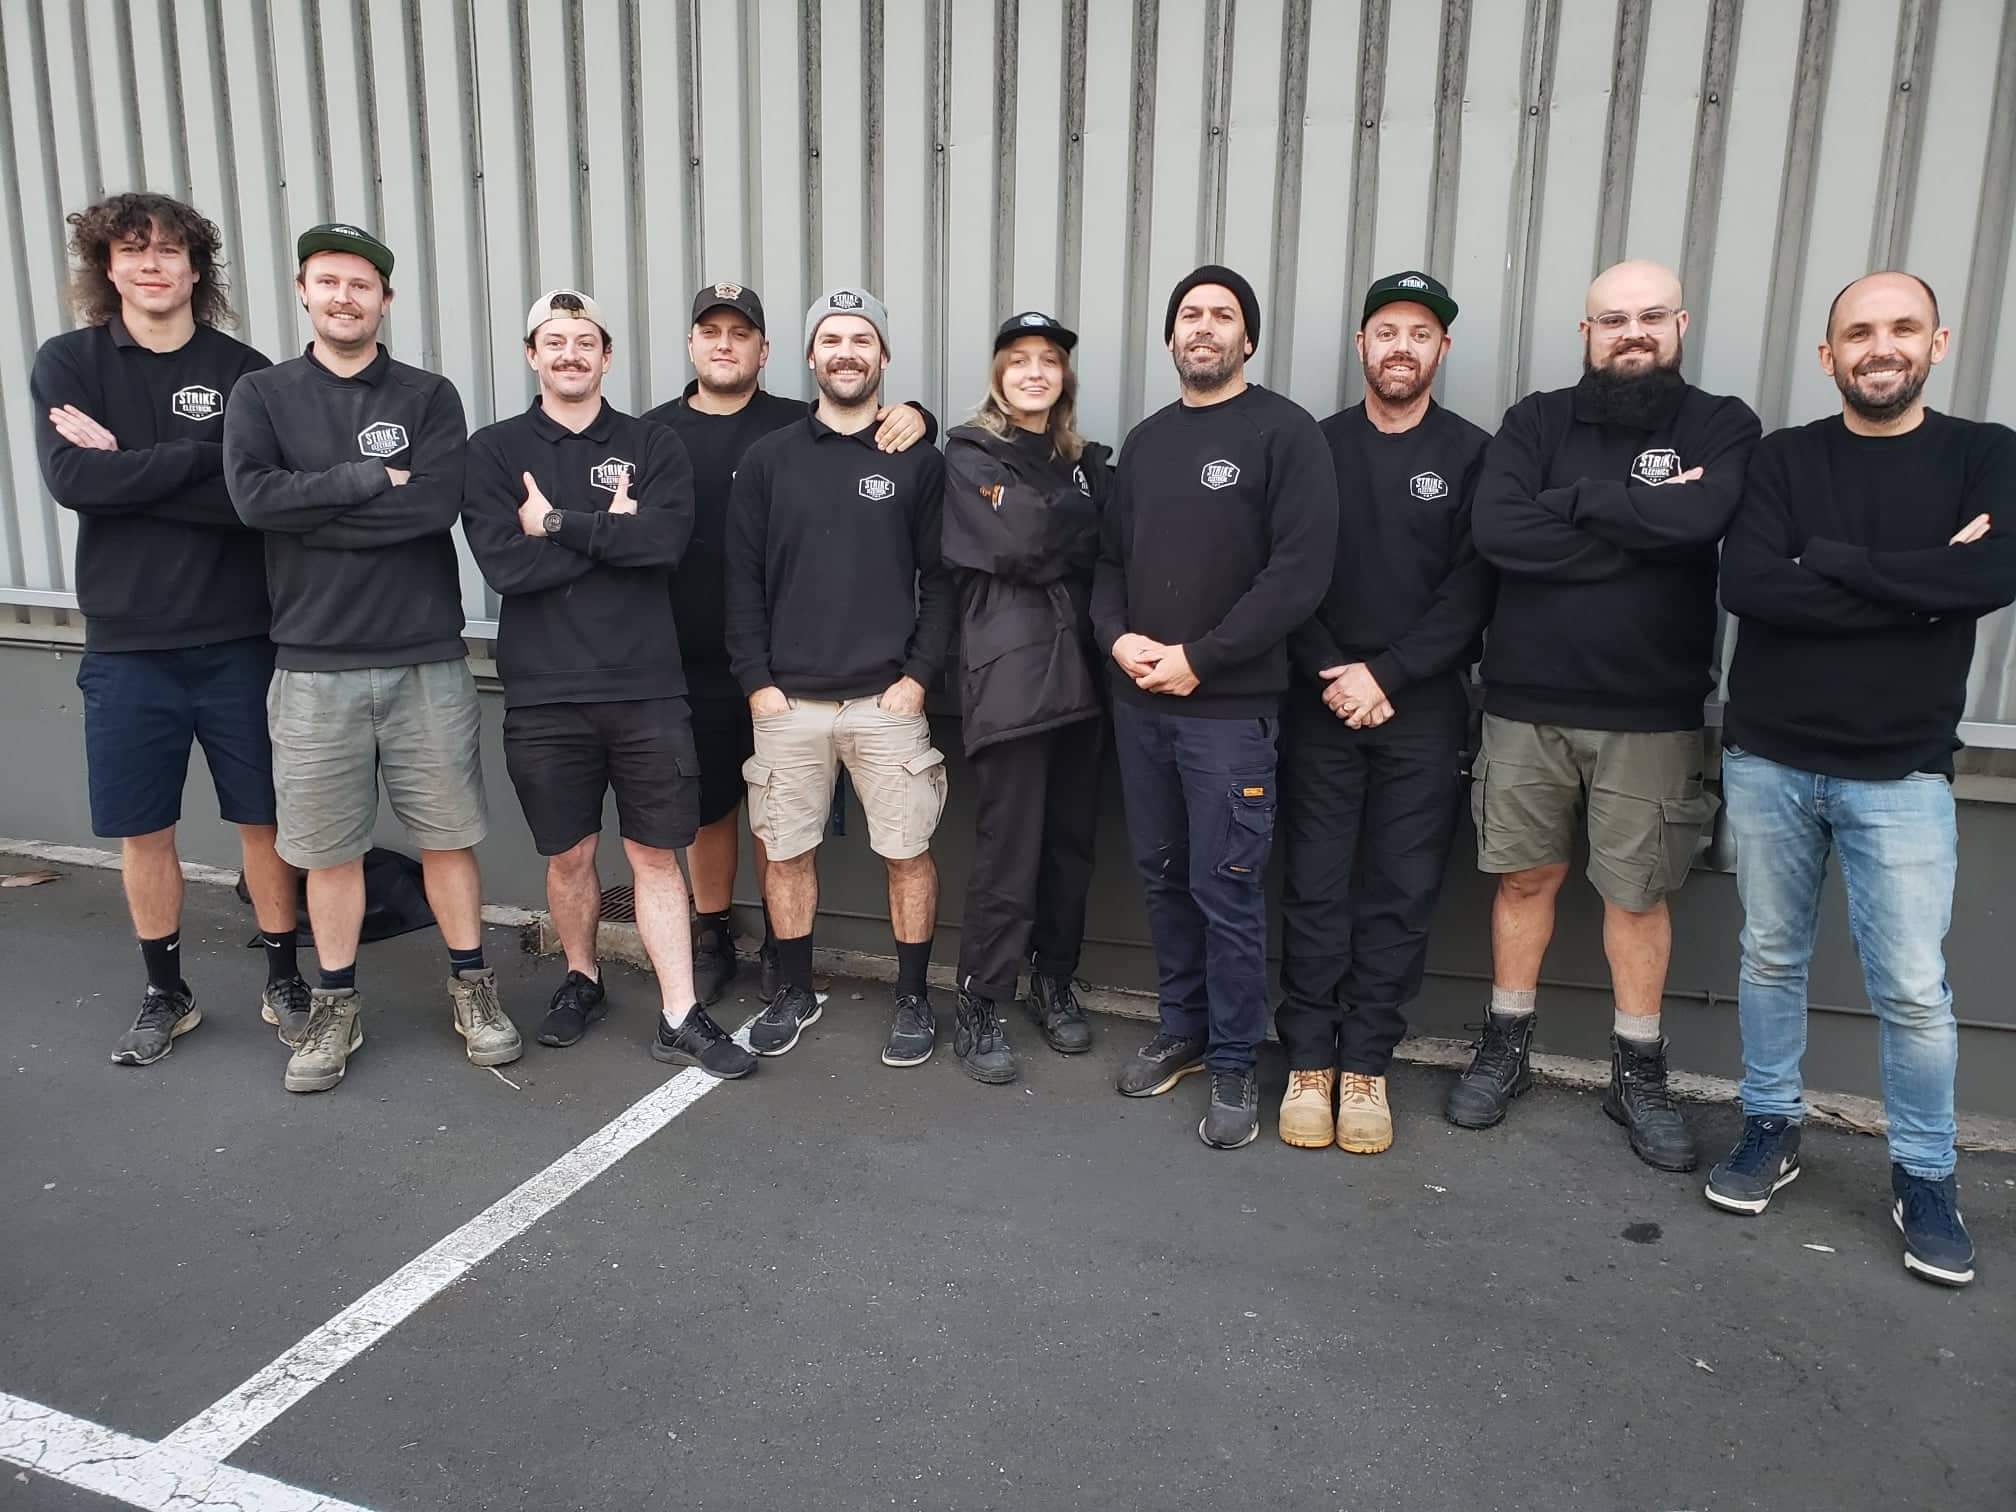 strike electrical licensed electricians in auckland